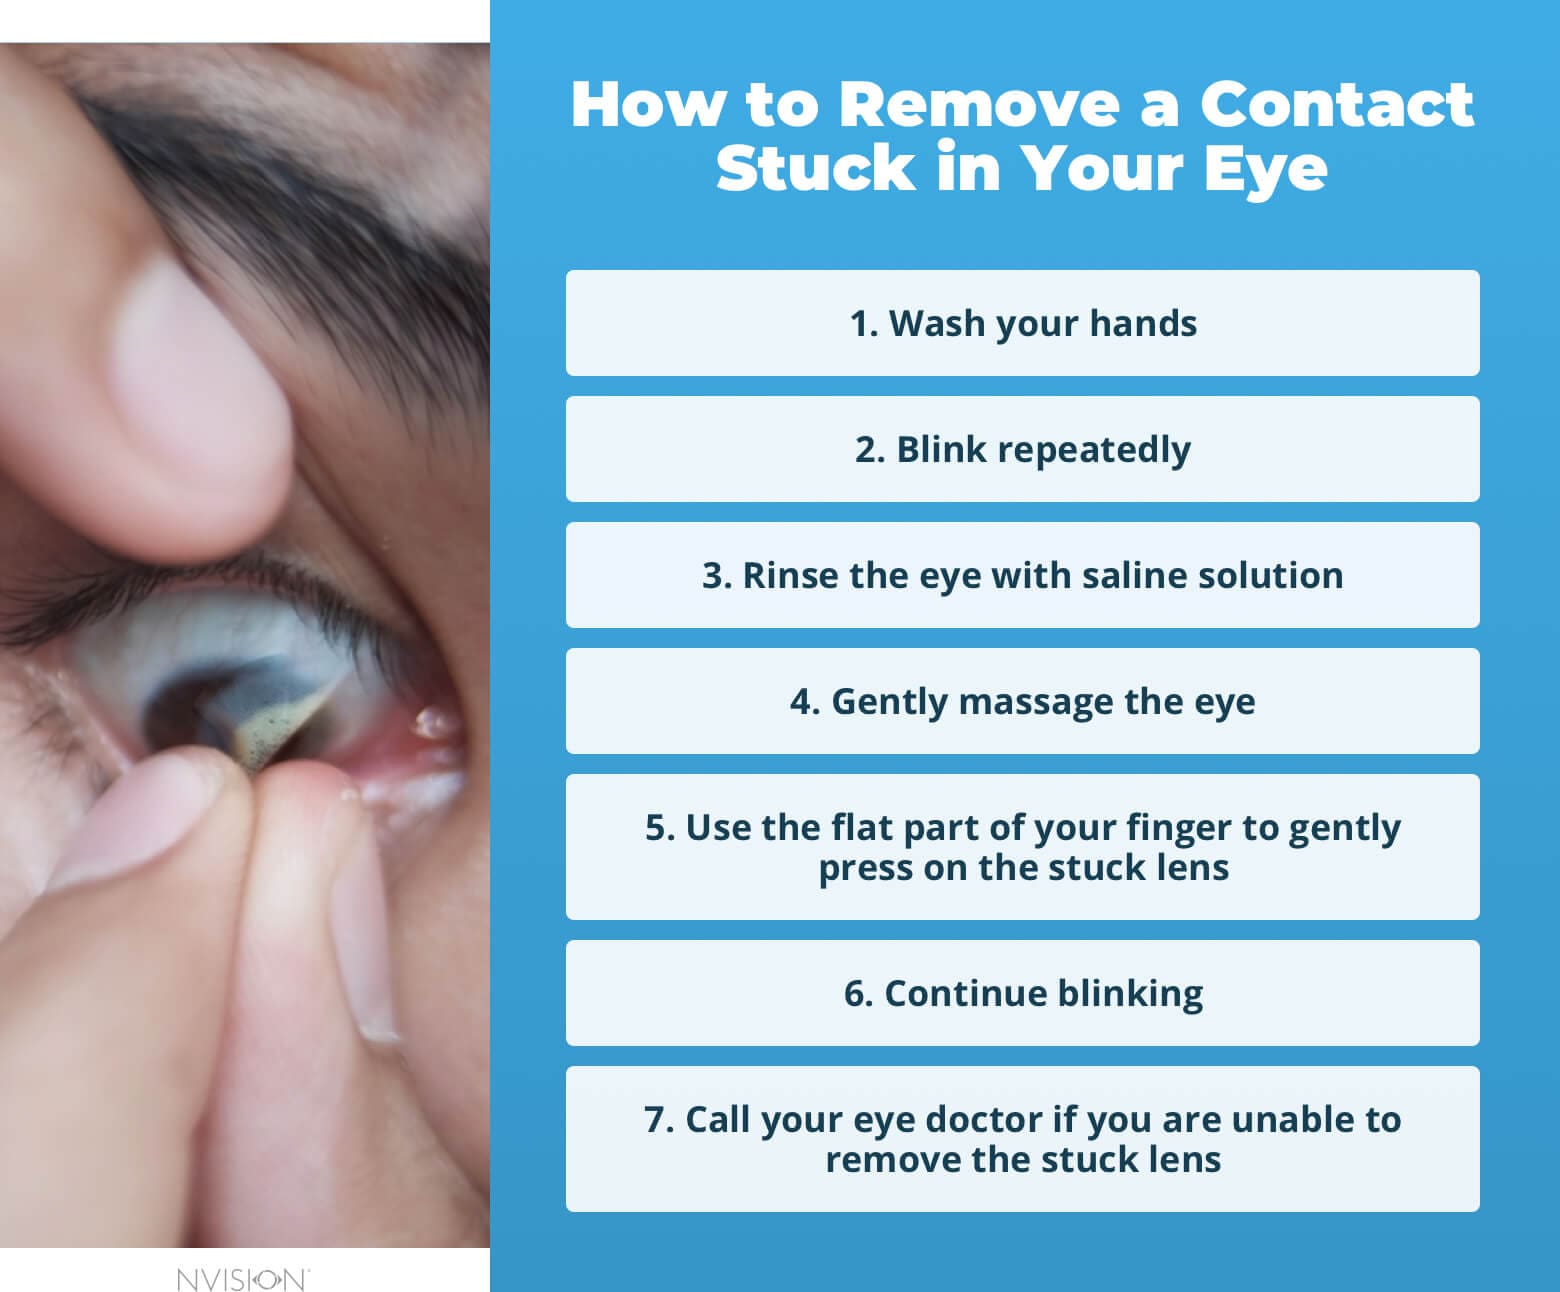 Can You Sleep with Contact Lenses?